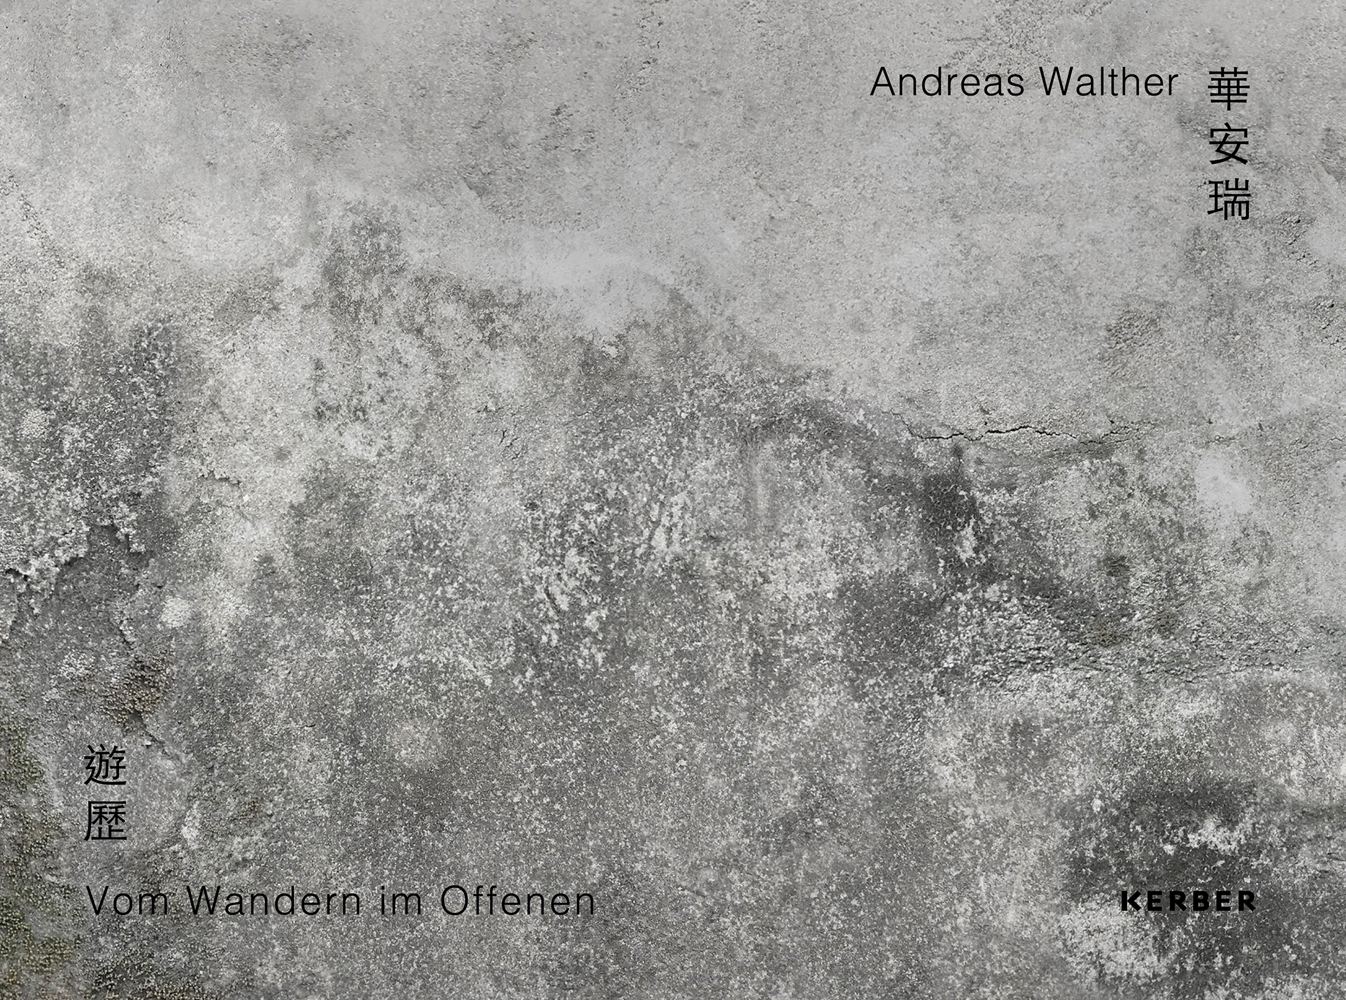 Aerial grey and white mottled landscape, Andreas Walther Vom Wandern im Offenen in grey font above and below.